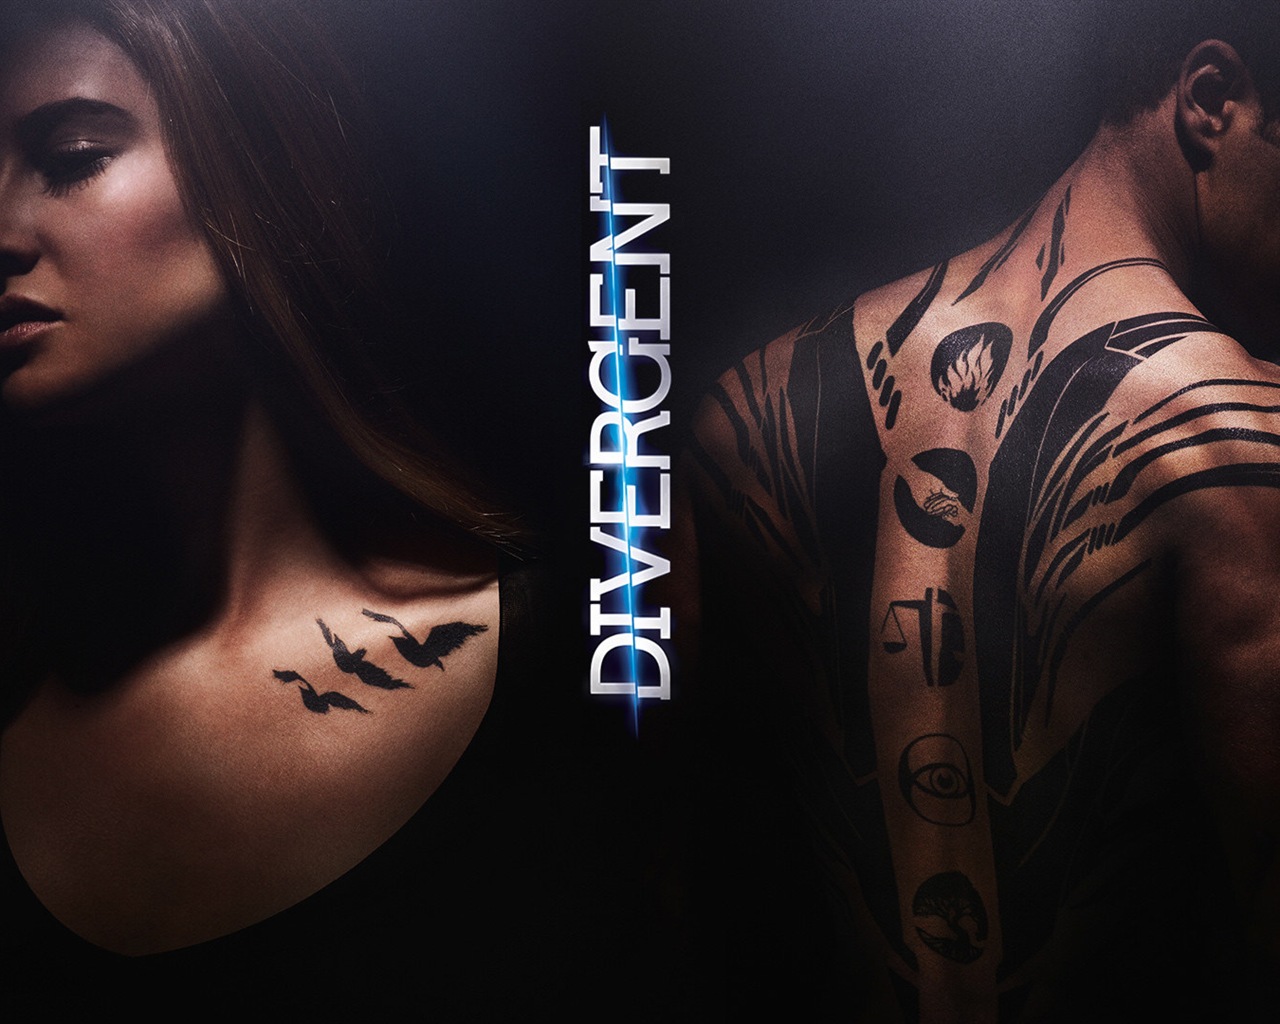 Divergent movie HD wallpapers #4 - 1280x1024